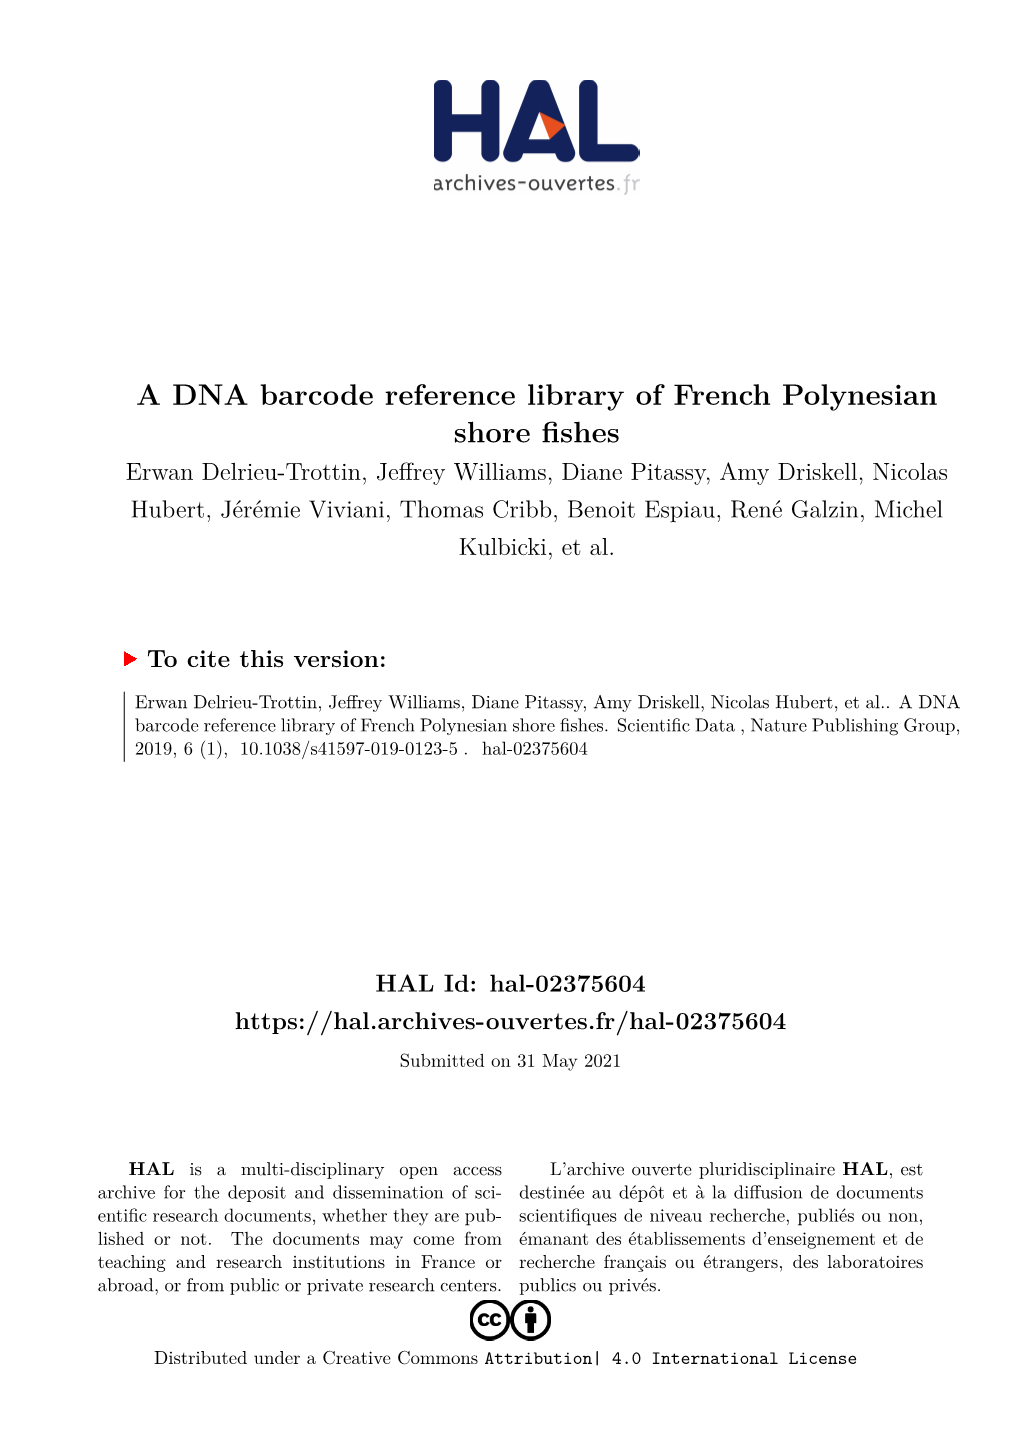 A DNA Barcode Reference Library of French Polynesian Shore Fishes